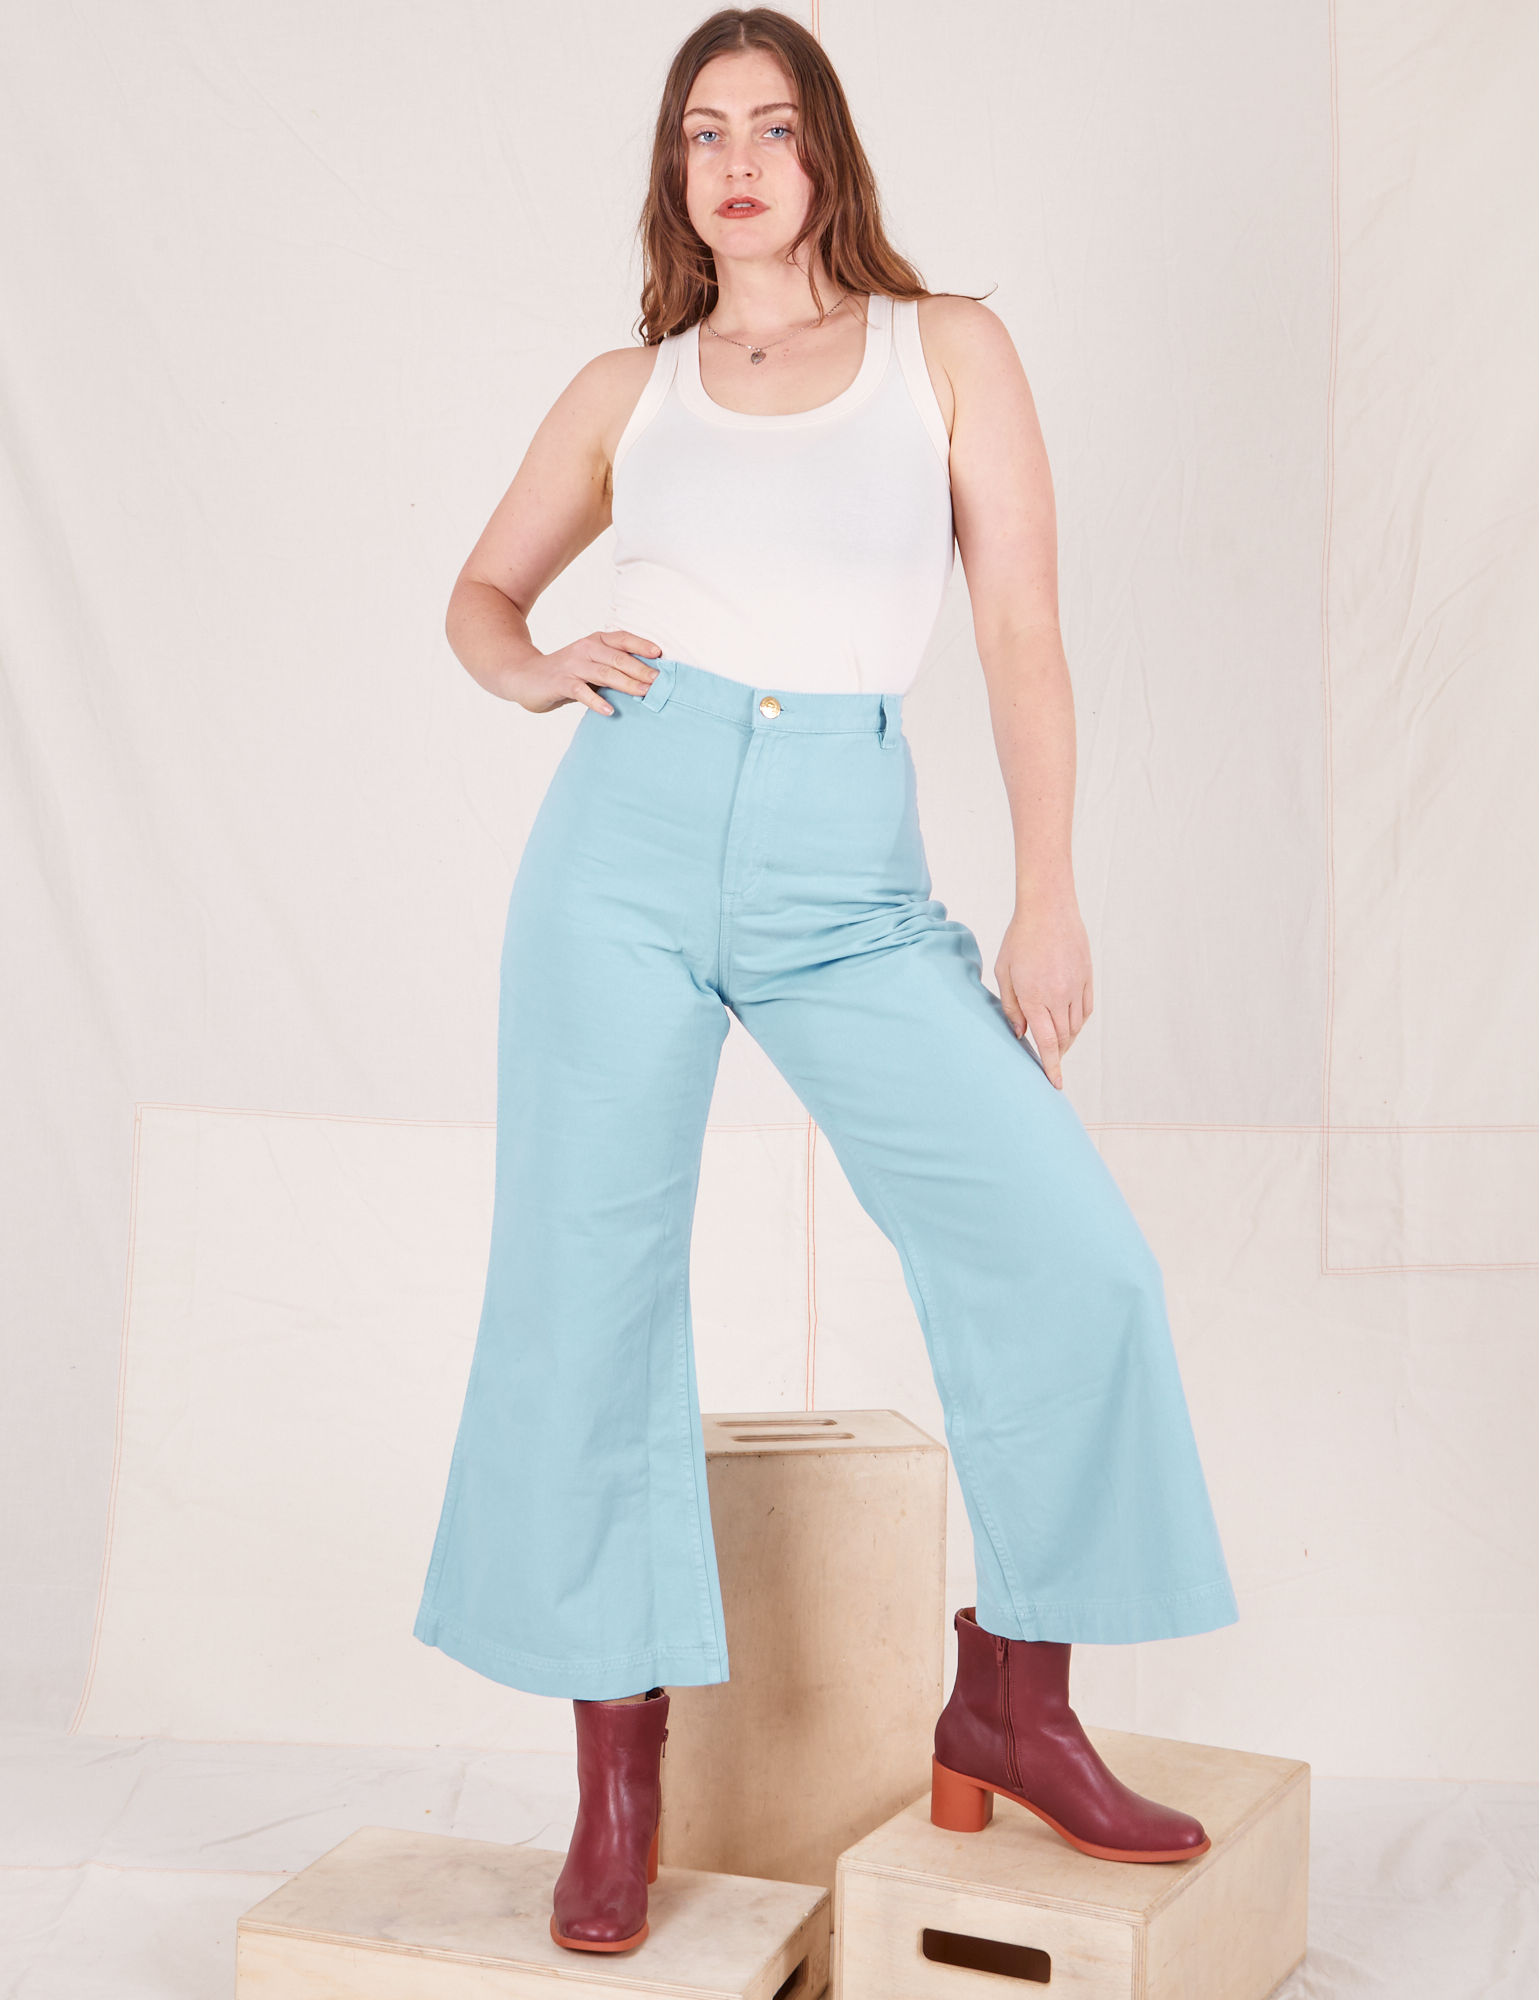 Allison is wearing Bell Bottoms in Baby Blue and vintage off-white Tank Top